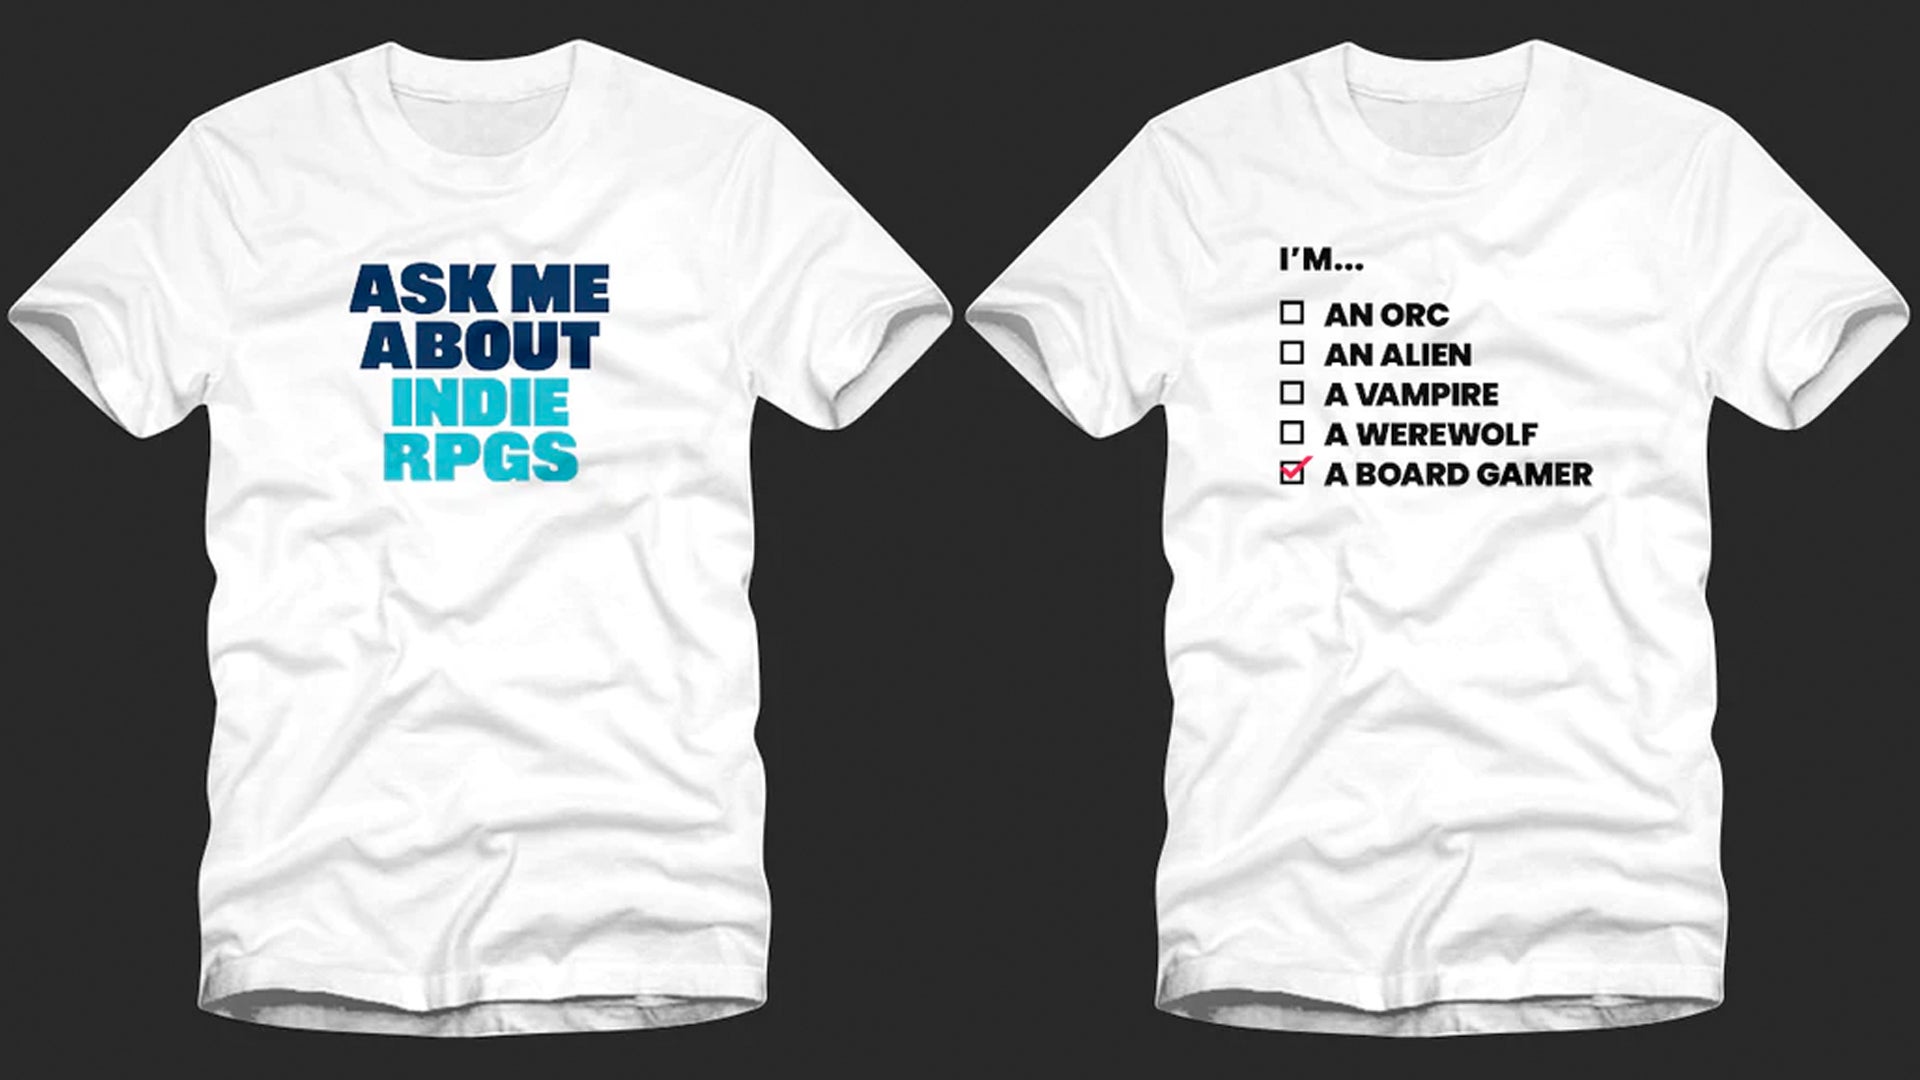 Image for Show the world how much you love indie RPGs and board games with our new T-shirt designs!